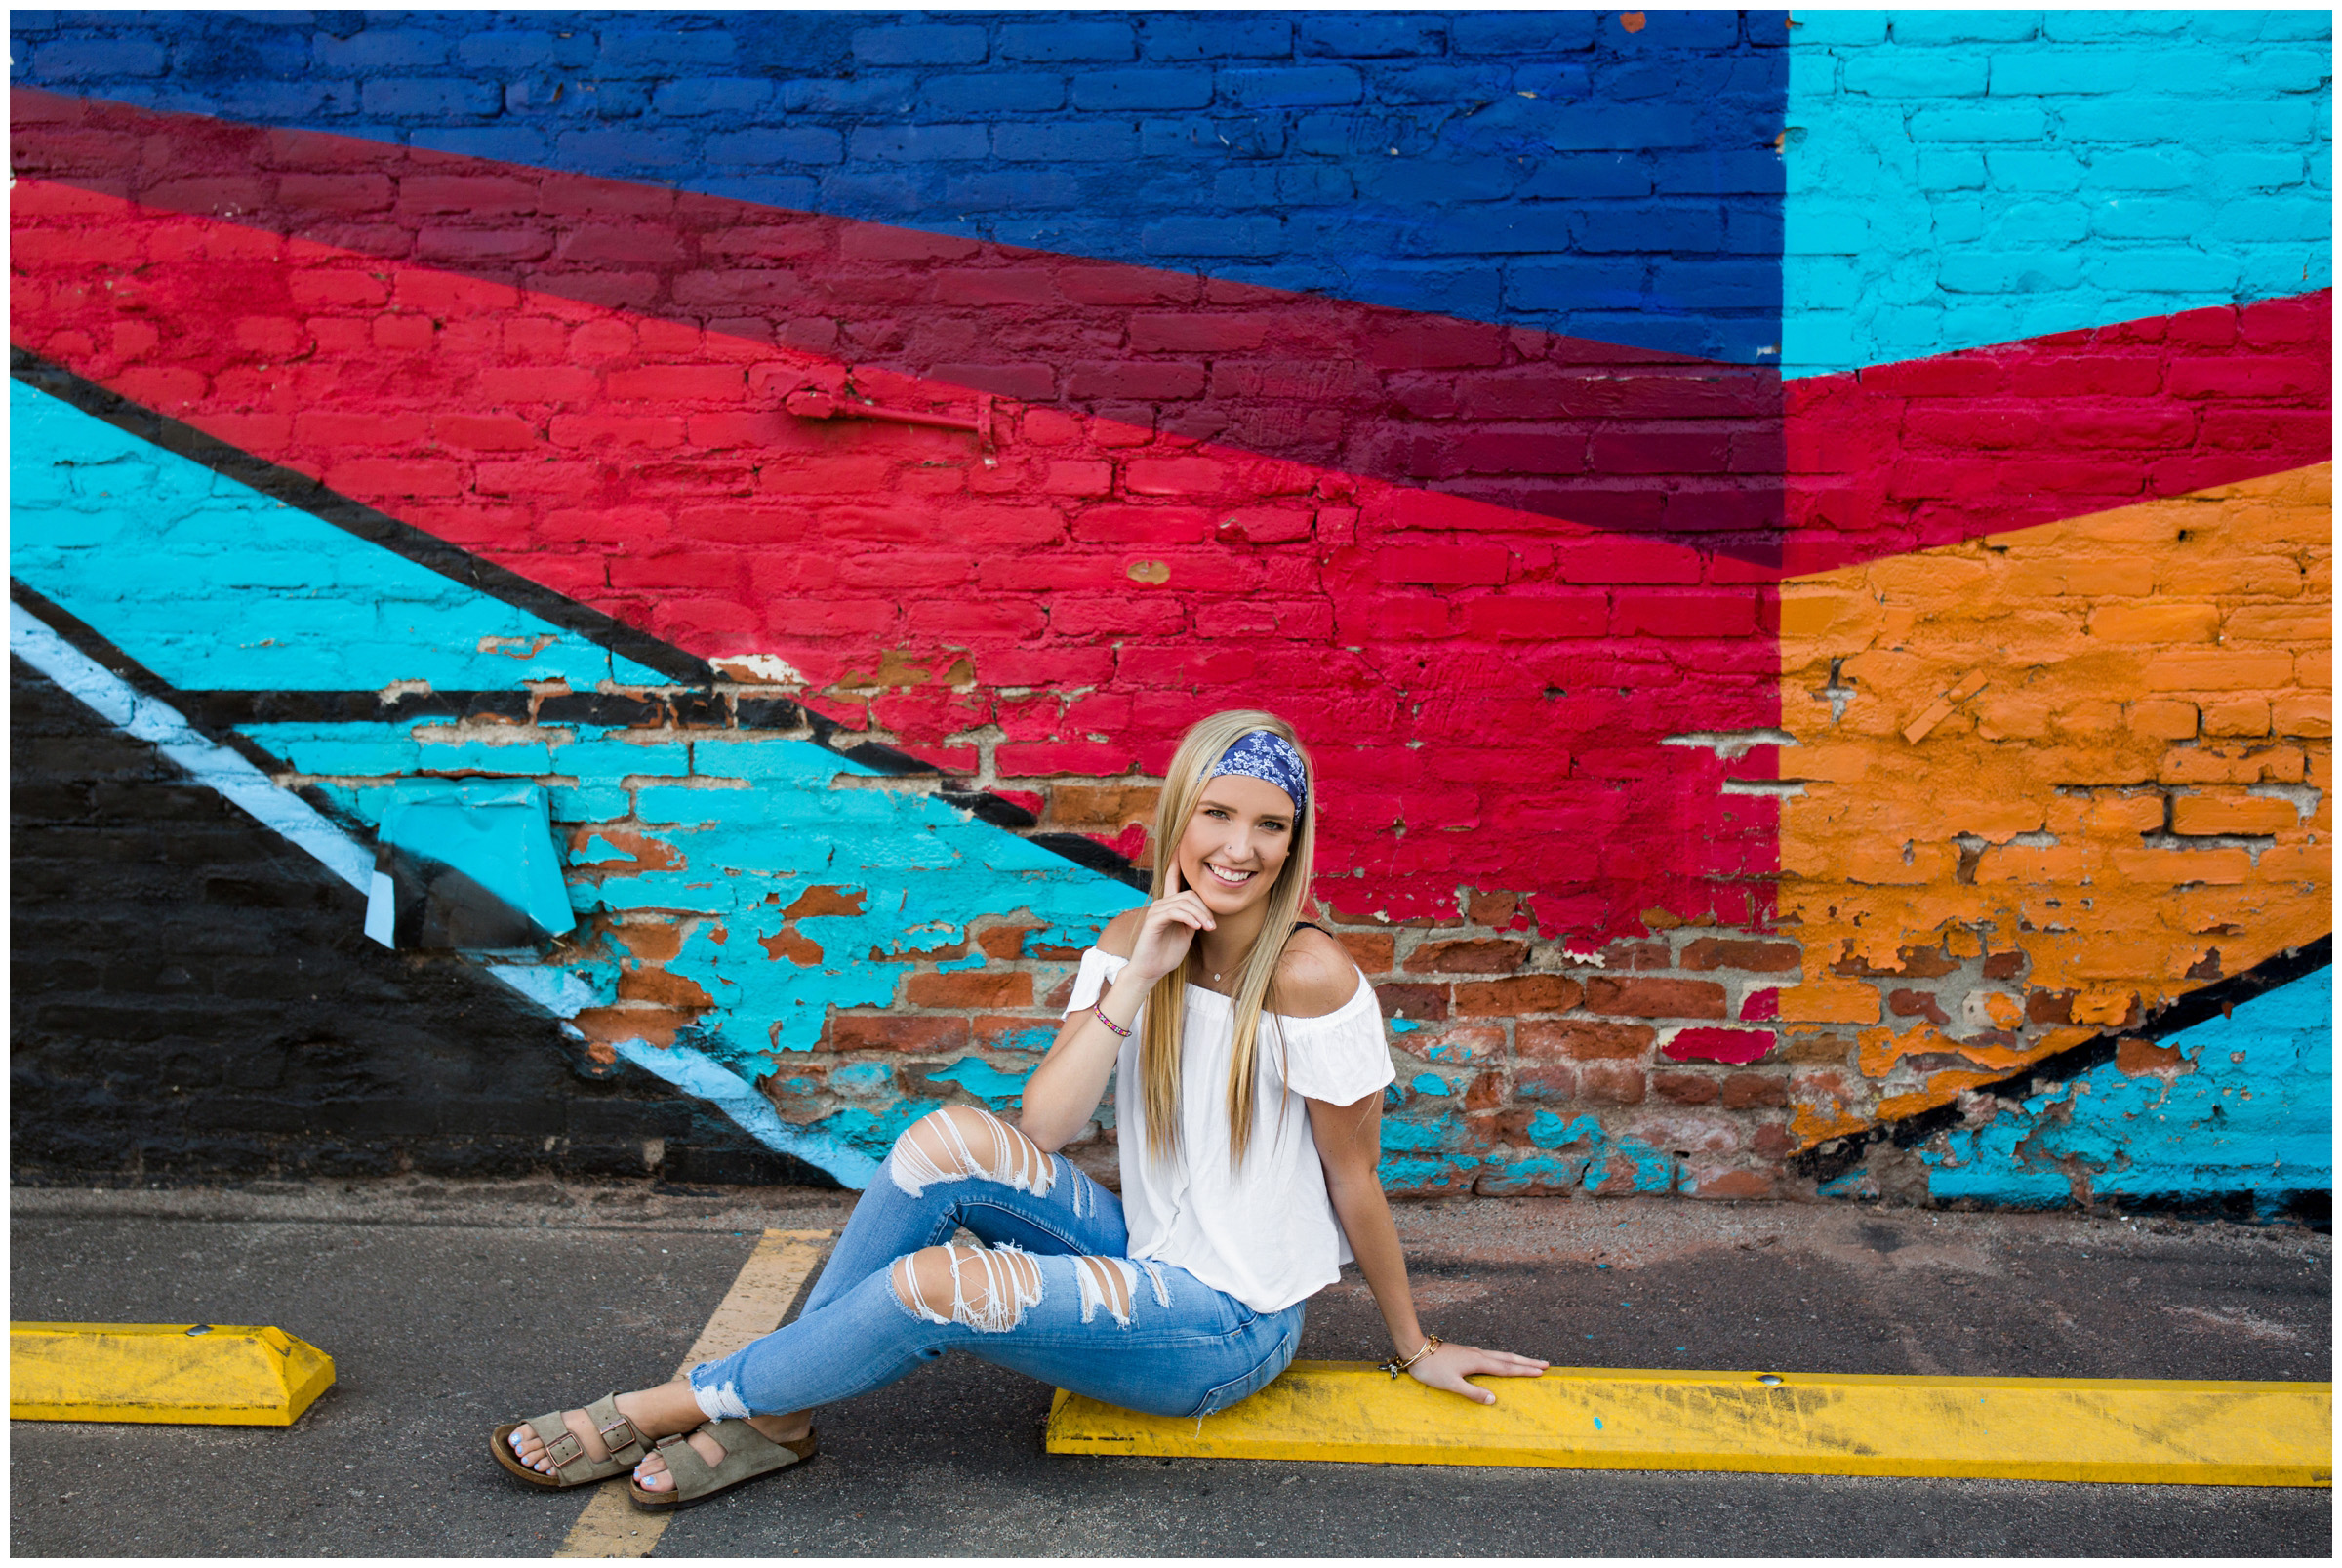 teen girl sitting on curb with art mural in background 